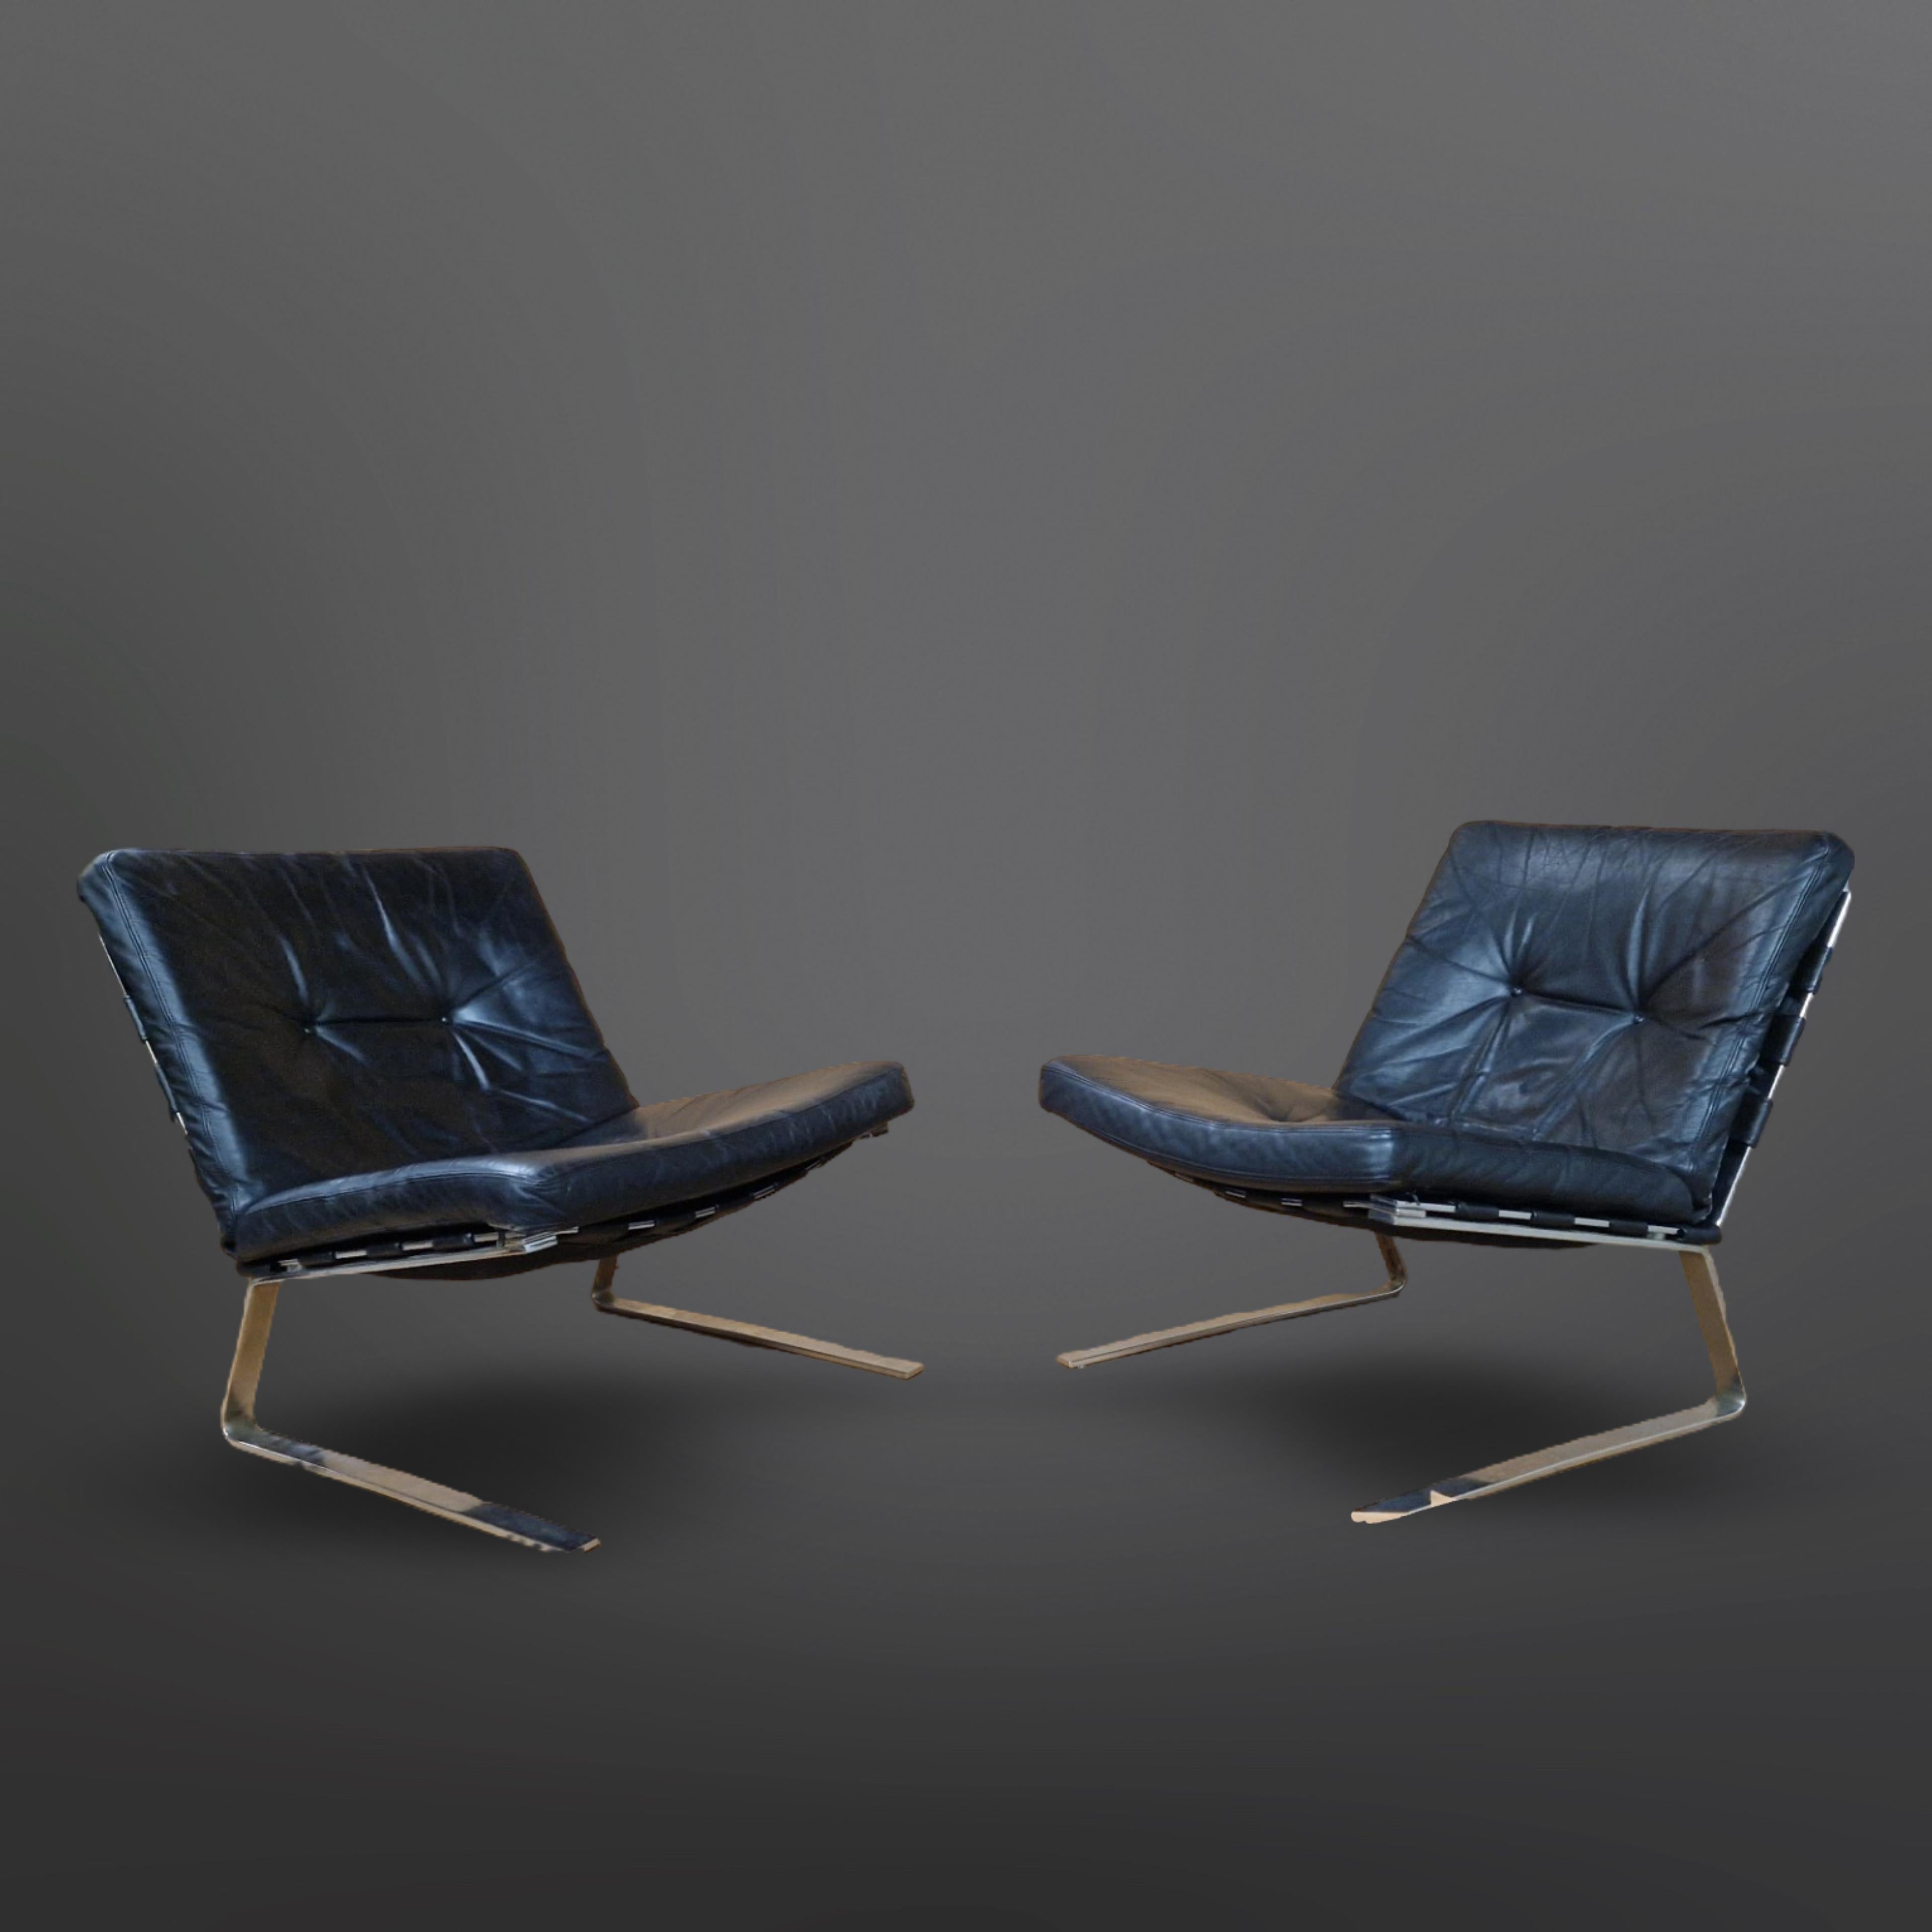 20th Century Set of 2 steel and leather lounge chairs, Germany 1960s